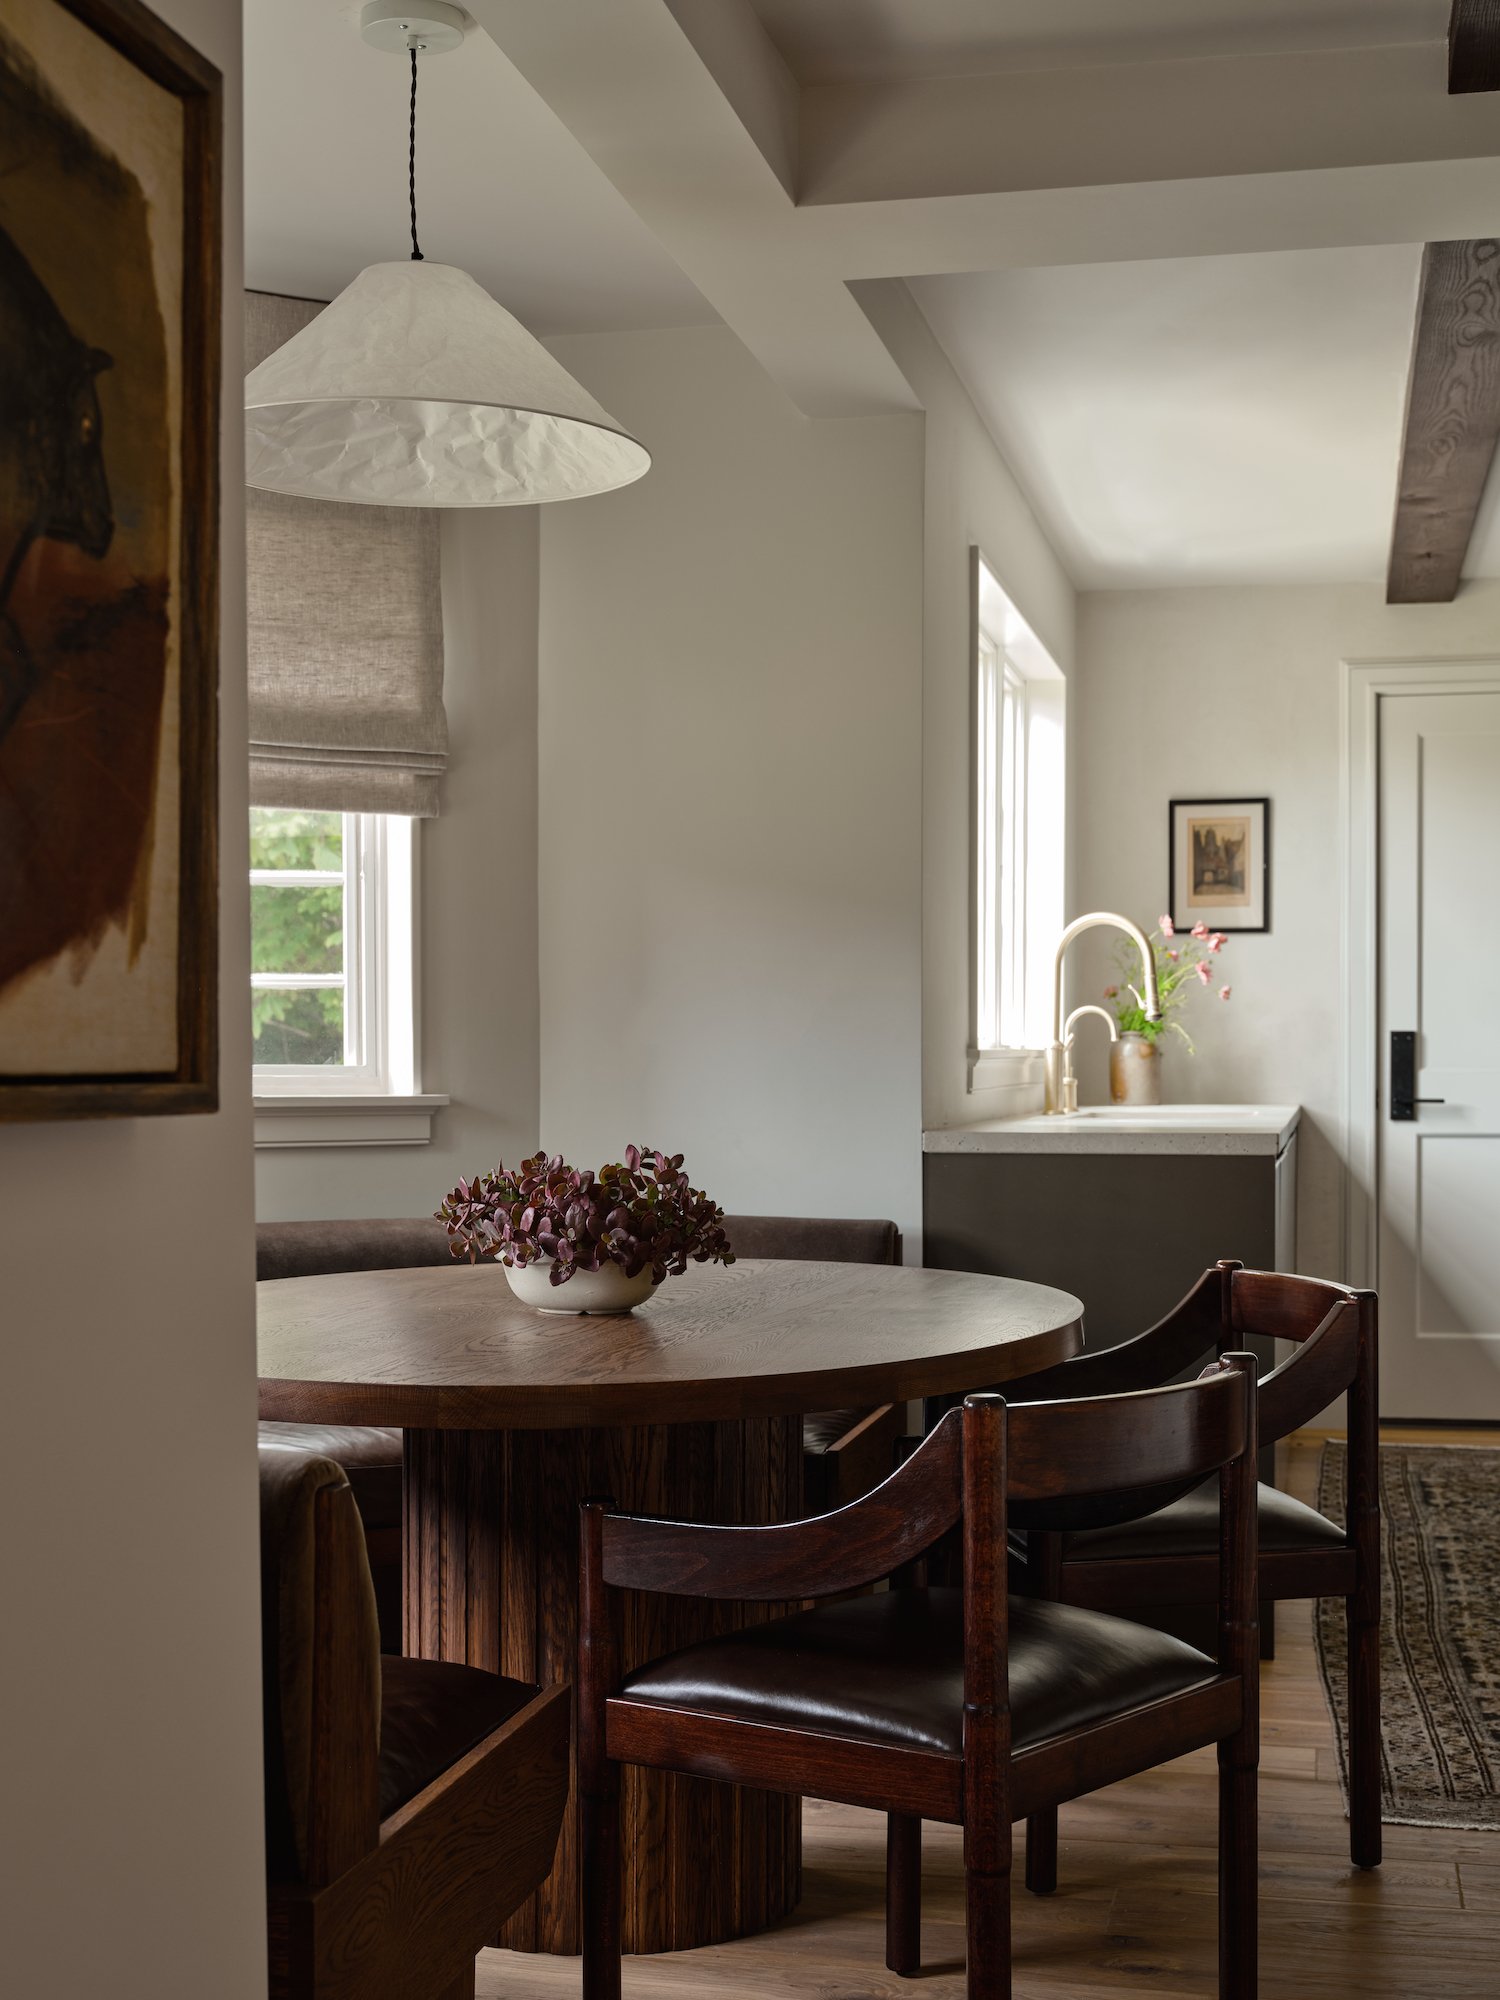 MOORE HOUSE DESIGN_NEW ENGLAND INTERIOR DESIGN FIRM_Blair Moore_ Belgian Midcentury Project_Banquette nook kitchen 03_ small.jpg